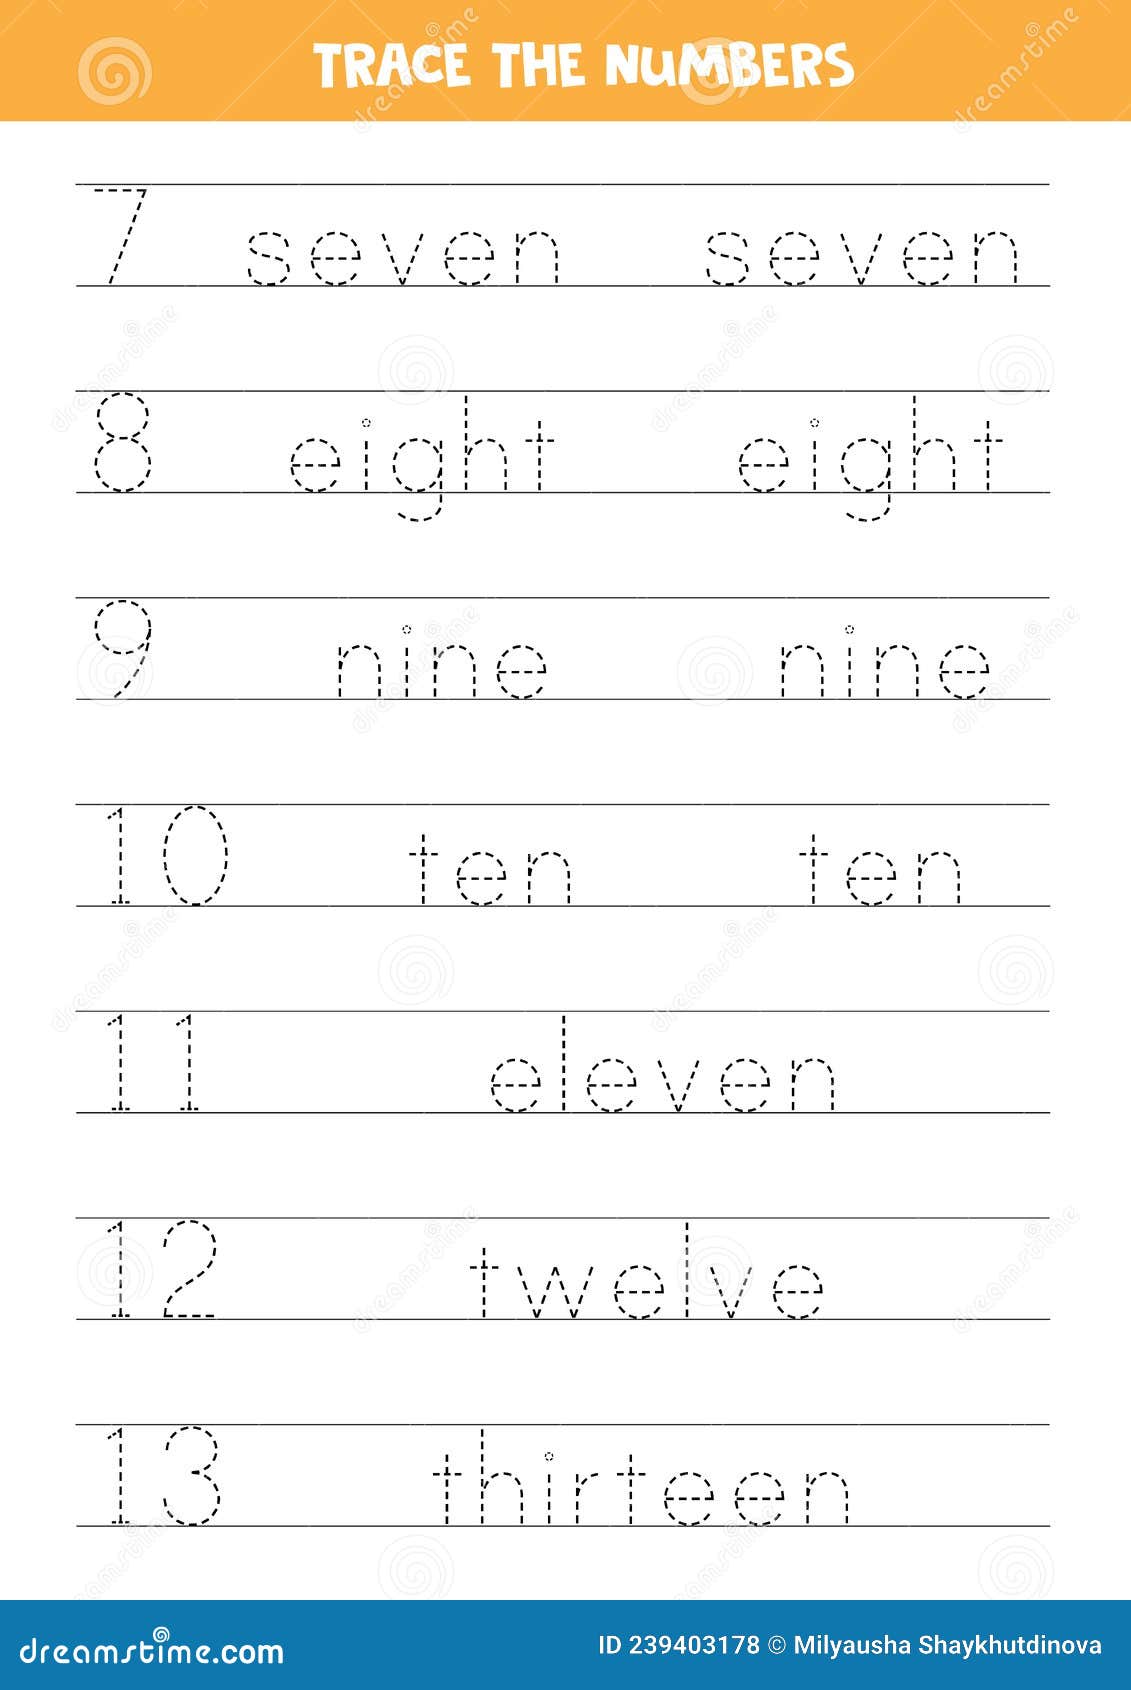 tracing-numbers-in-words-worksheet-for-children-stock-vector-illustration-of-flashcard-math